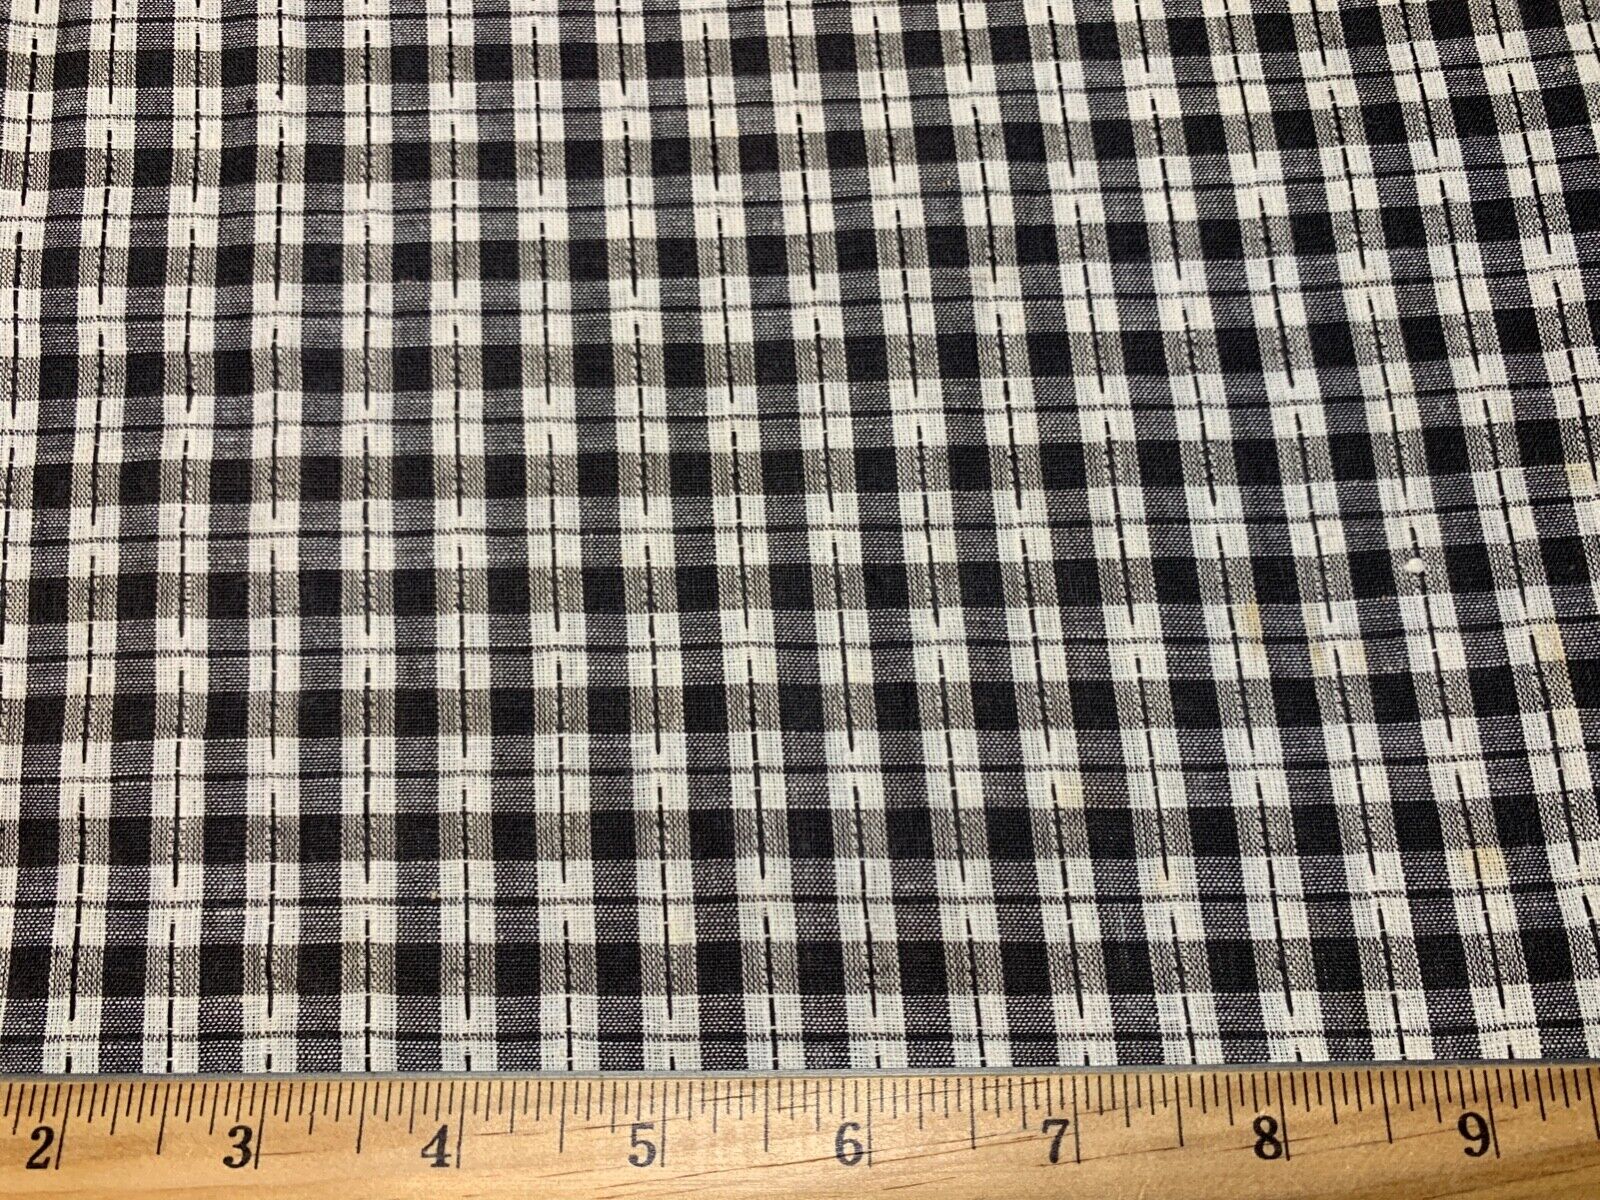 Antique Vintage Cotton Fabric Late 1800s Early 1900s Black&White Homespun 1/2yd